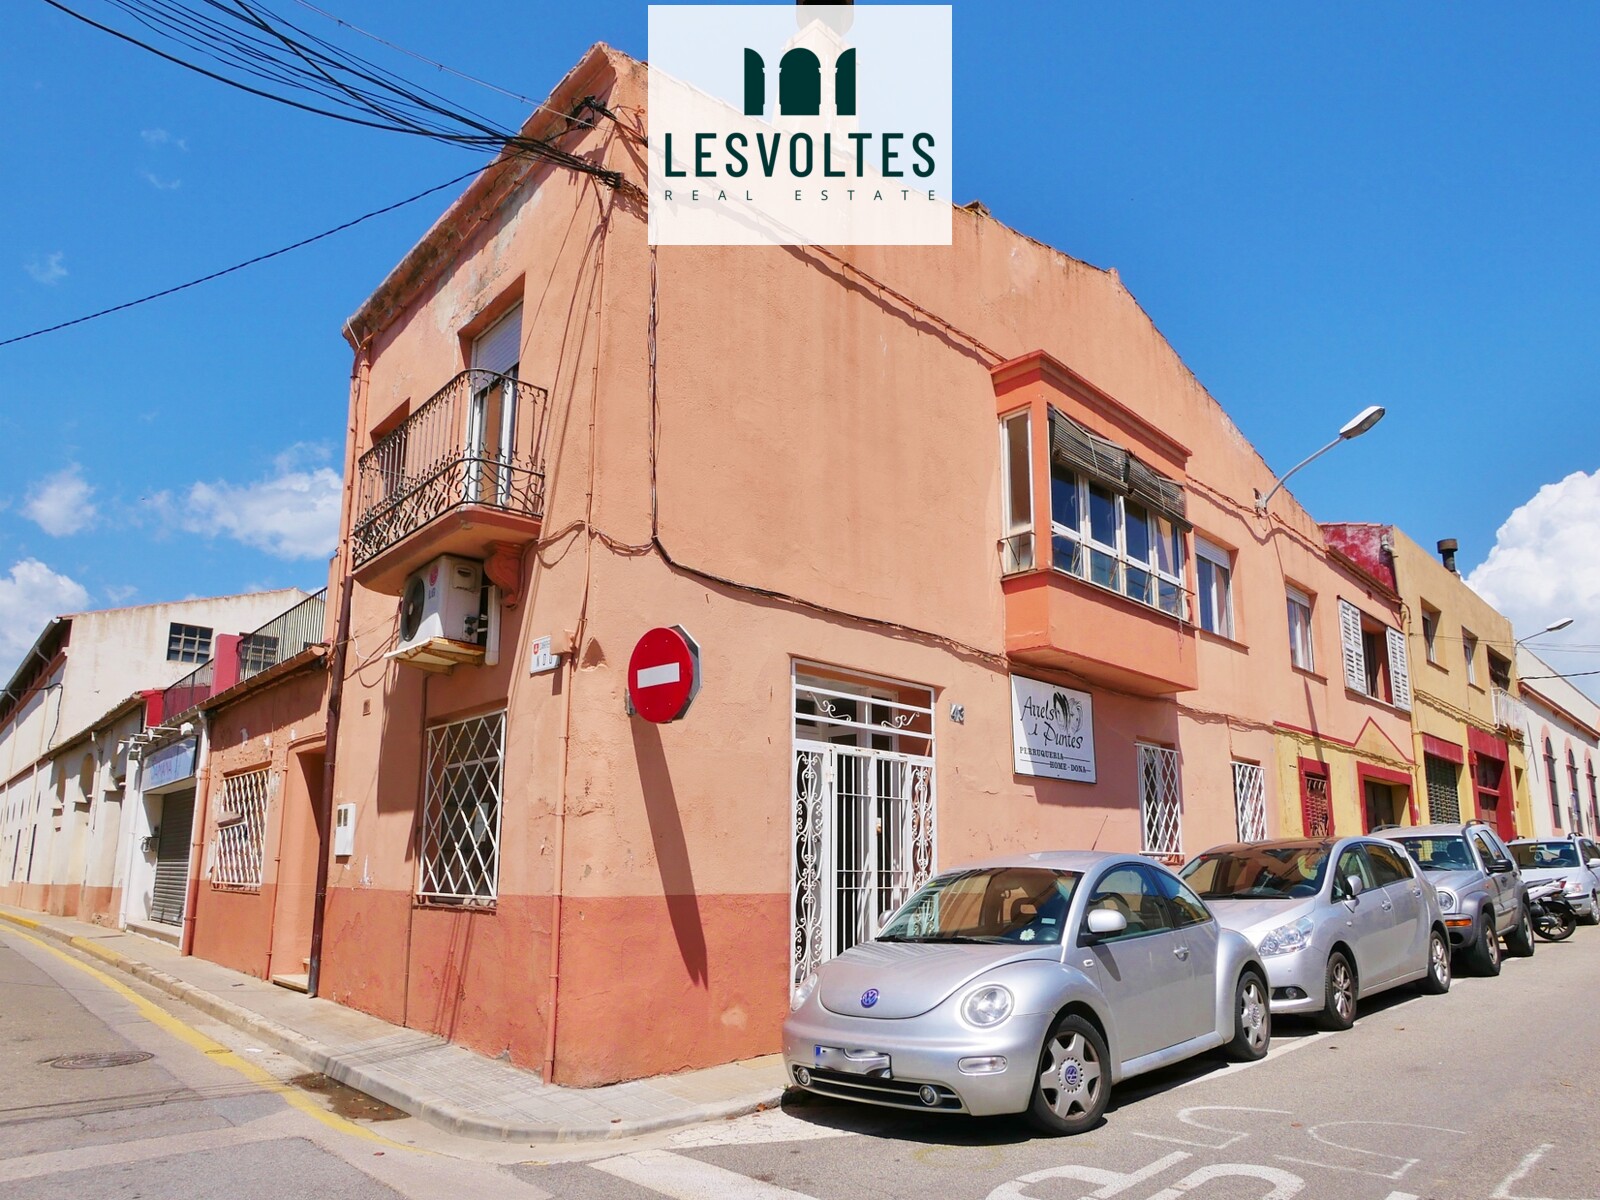 LARGE CORNER PLOT 435 M2 WITH HIGH BUILDING FOR SALE IN THE CENTER OF PALAFRUGELL.